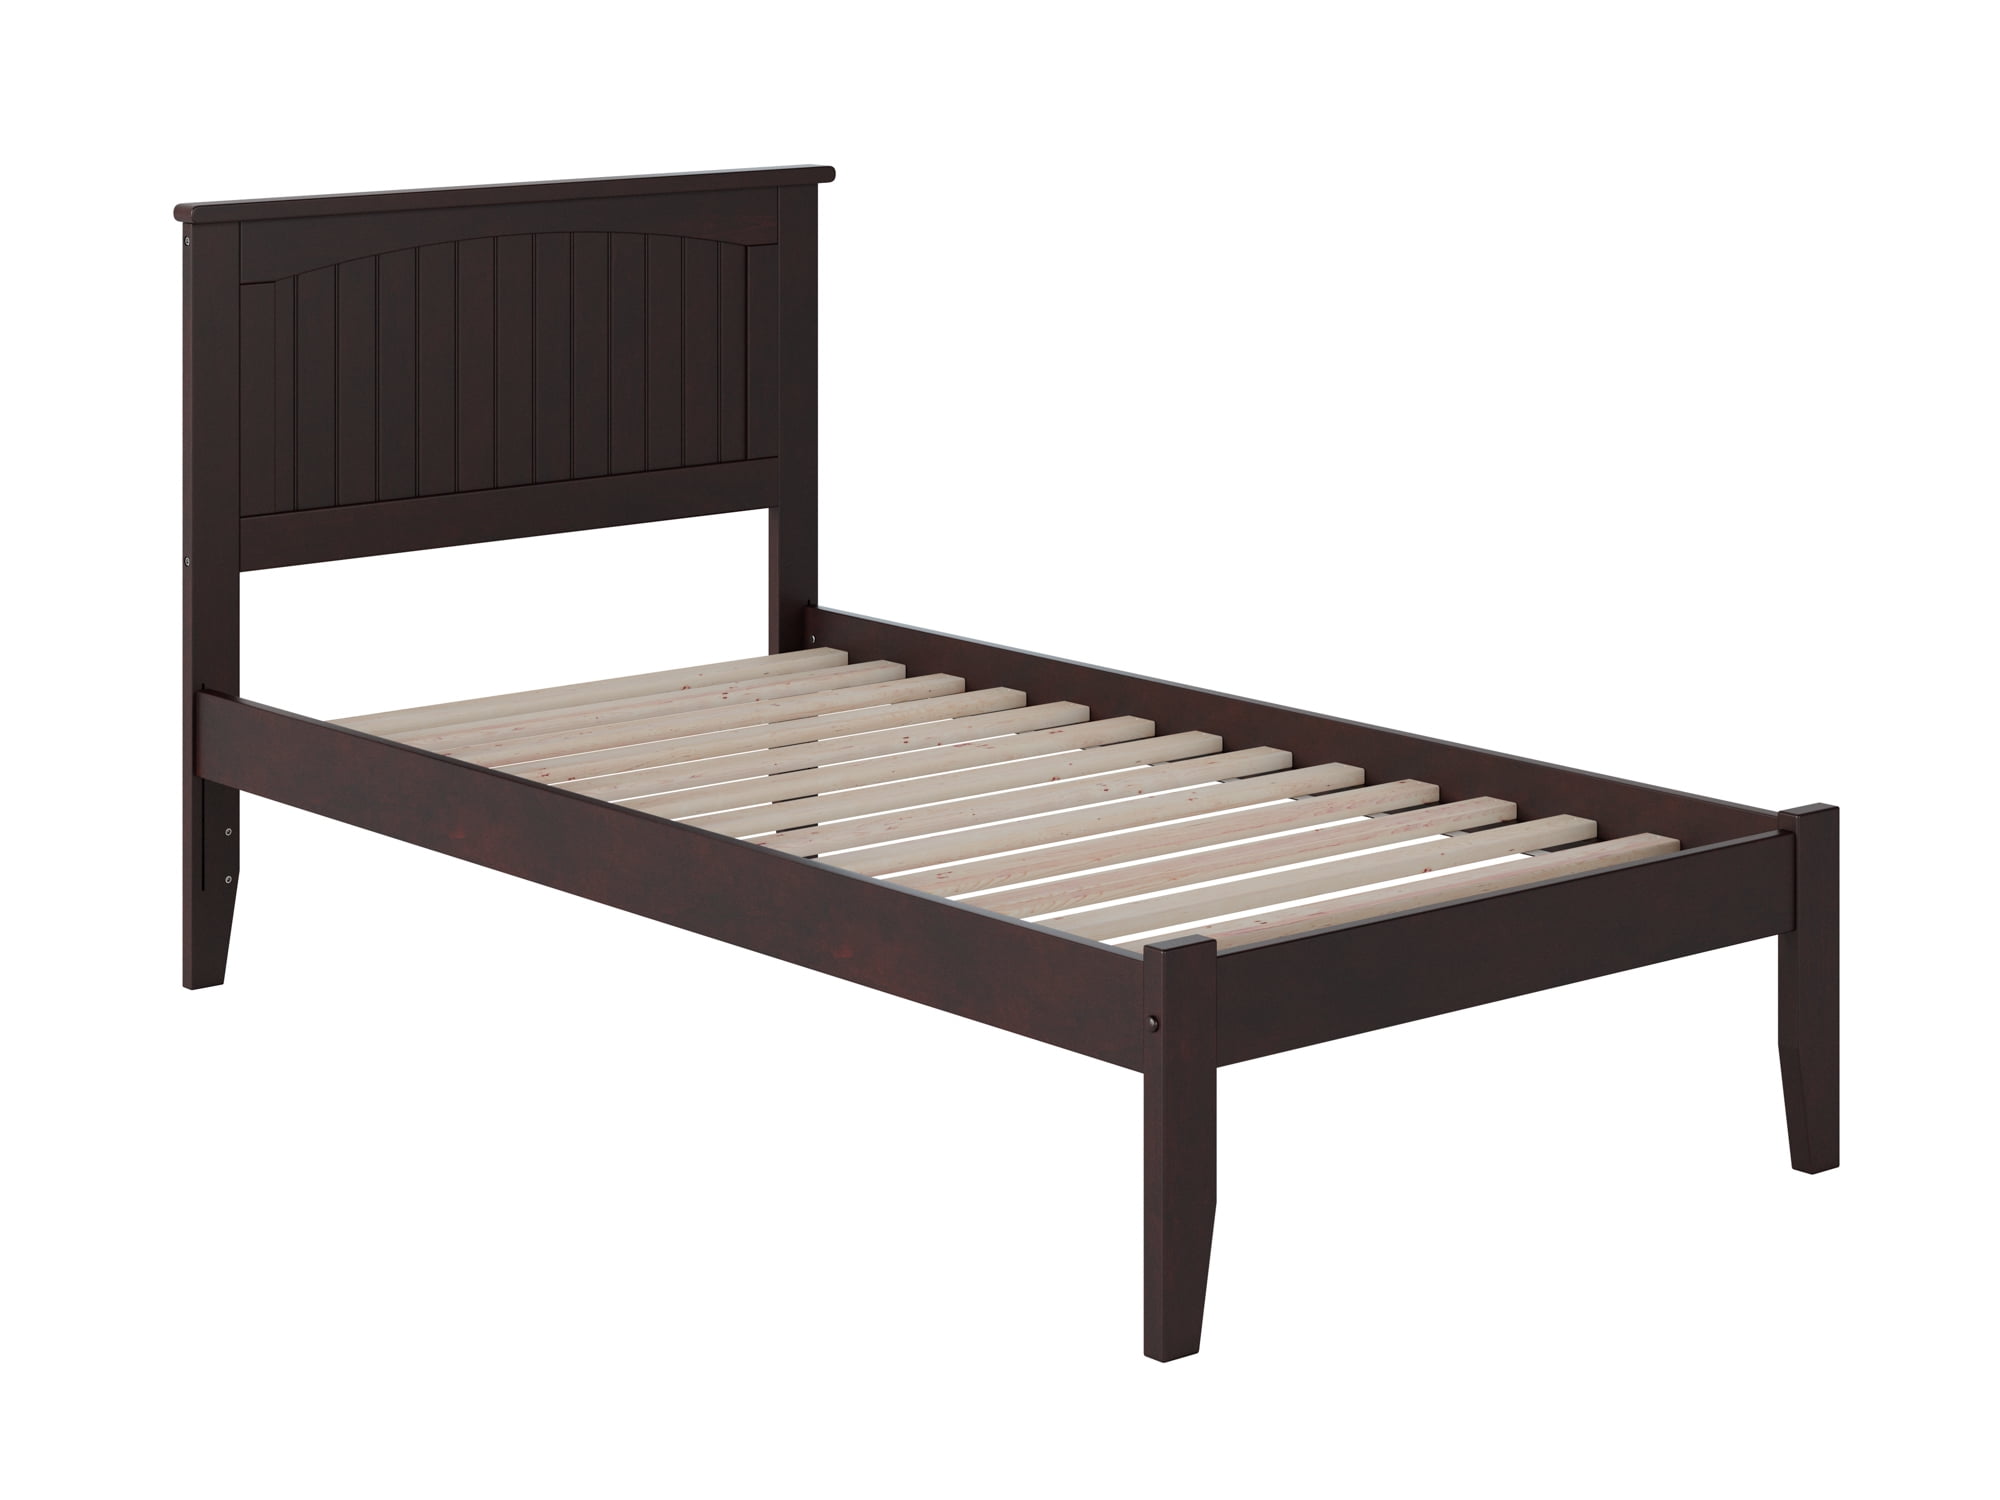 Picture of Atlantic Furniture AR8211001 Nantucket Extra Long Open Foot, Espresso - Twin